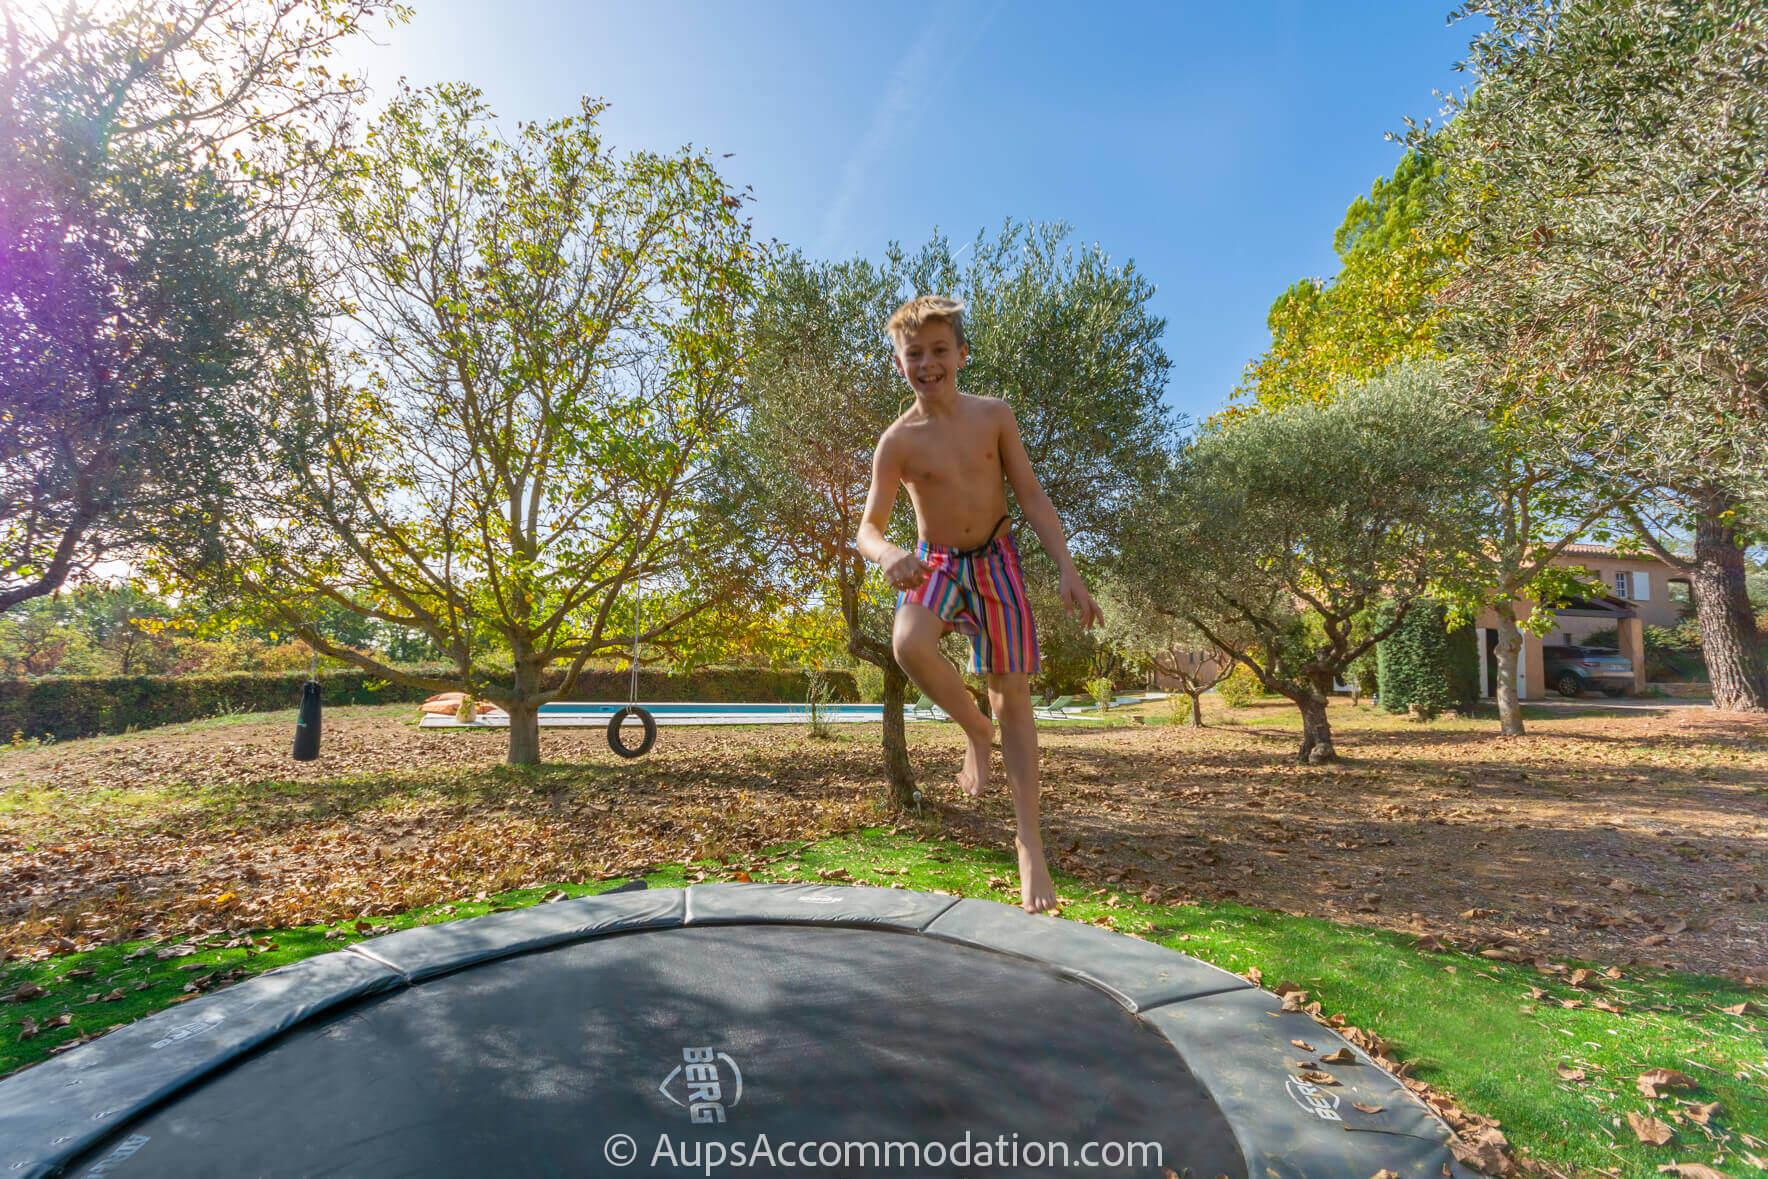 Le Mas Aups - In ground trampoline, climbing rope, punch bag and swing are provided